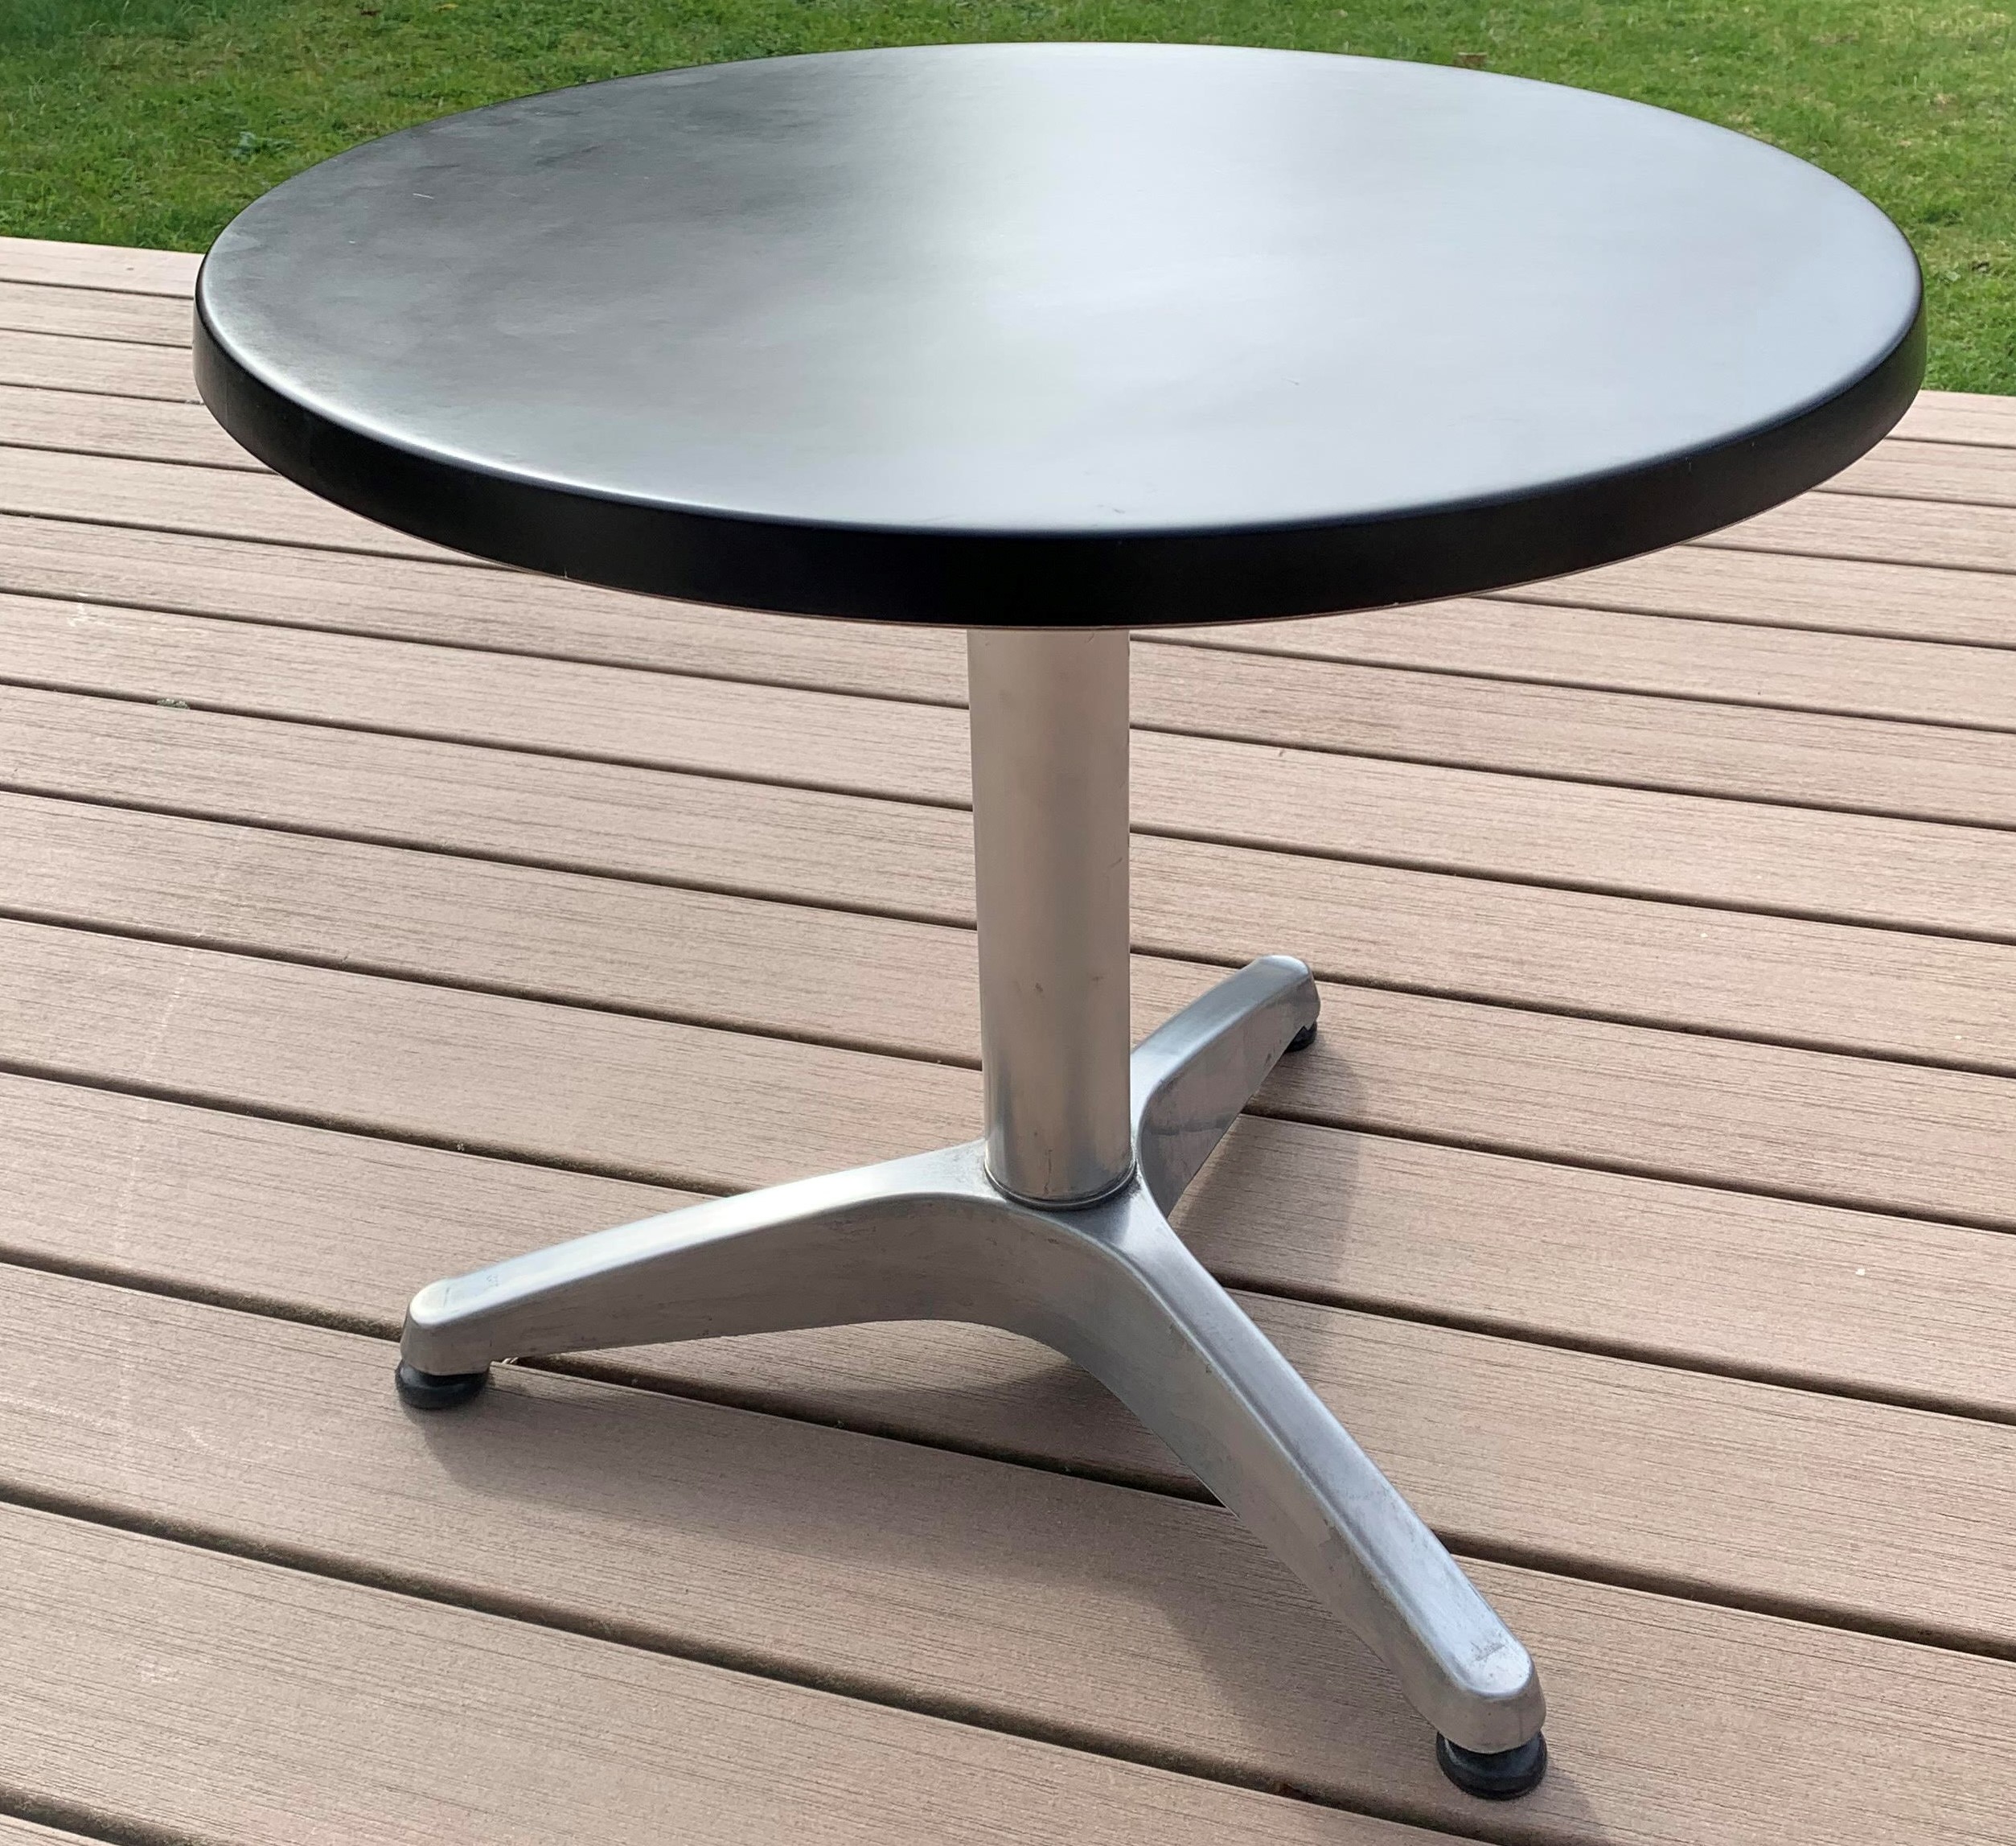 PREMIUM ROUND CAFE OR COFFEE TABLE